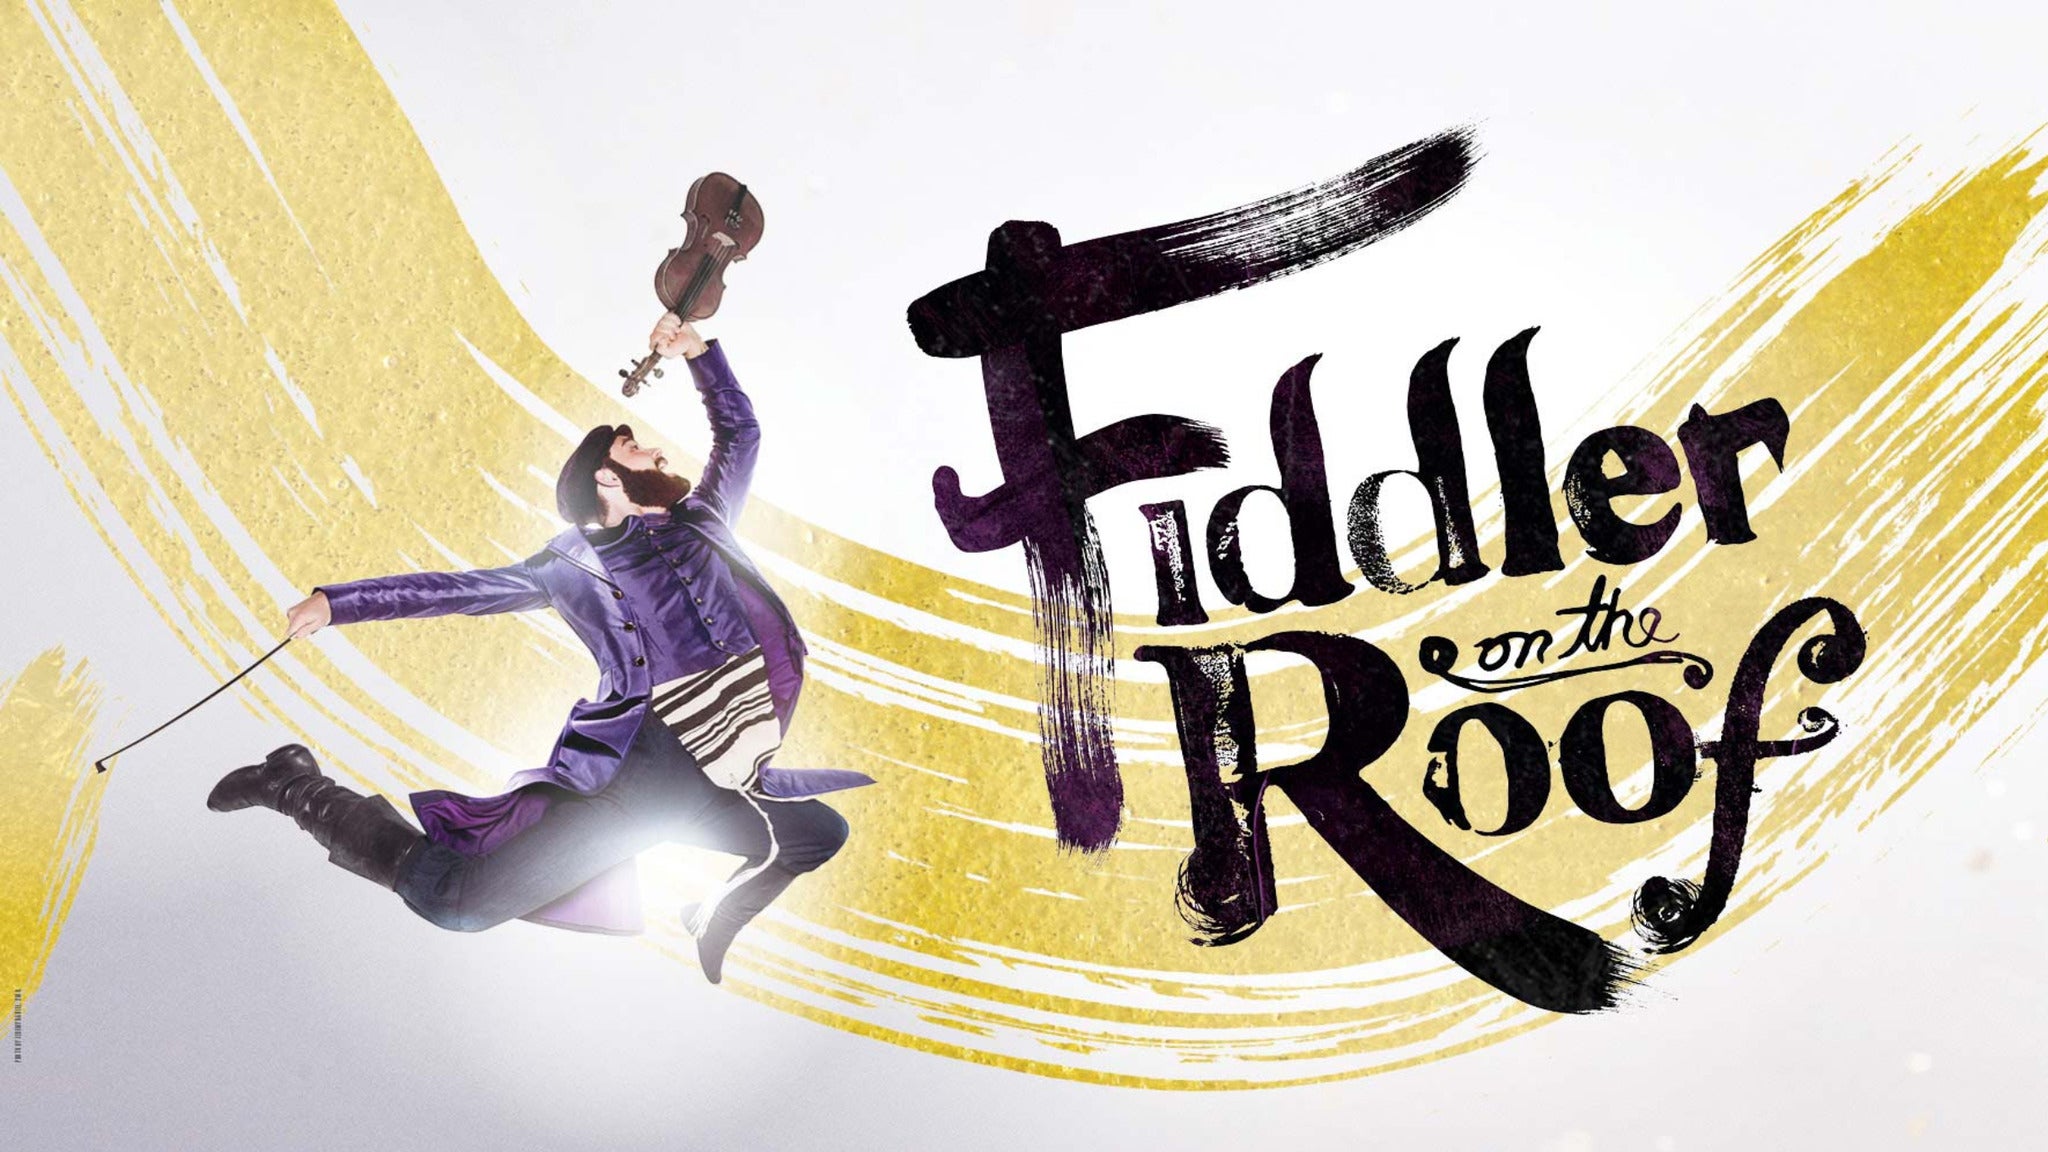 Fiddler On The Roof at Orpheum Theatre-San Francisco